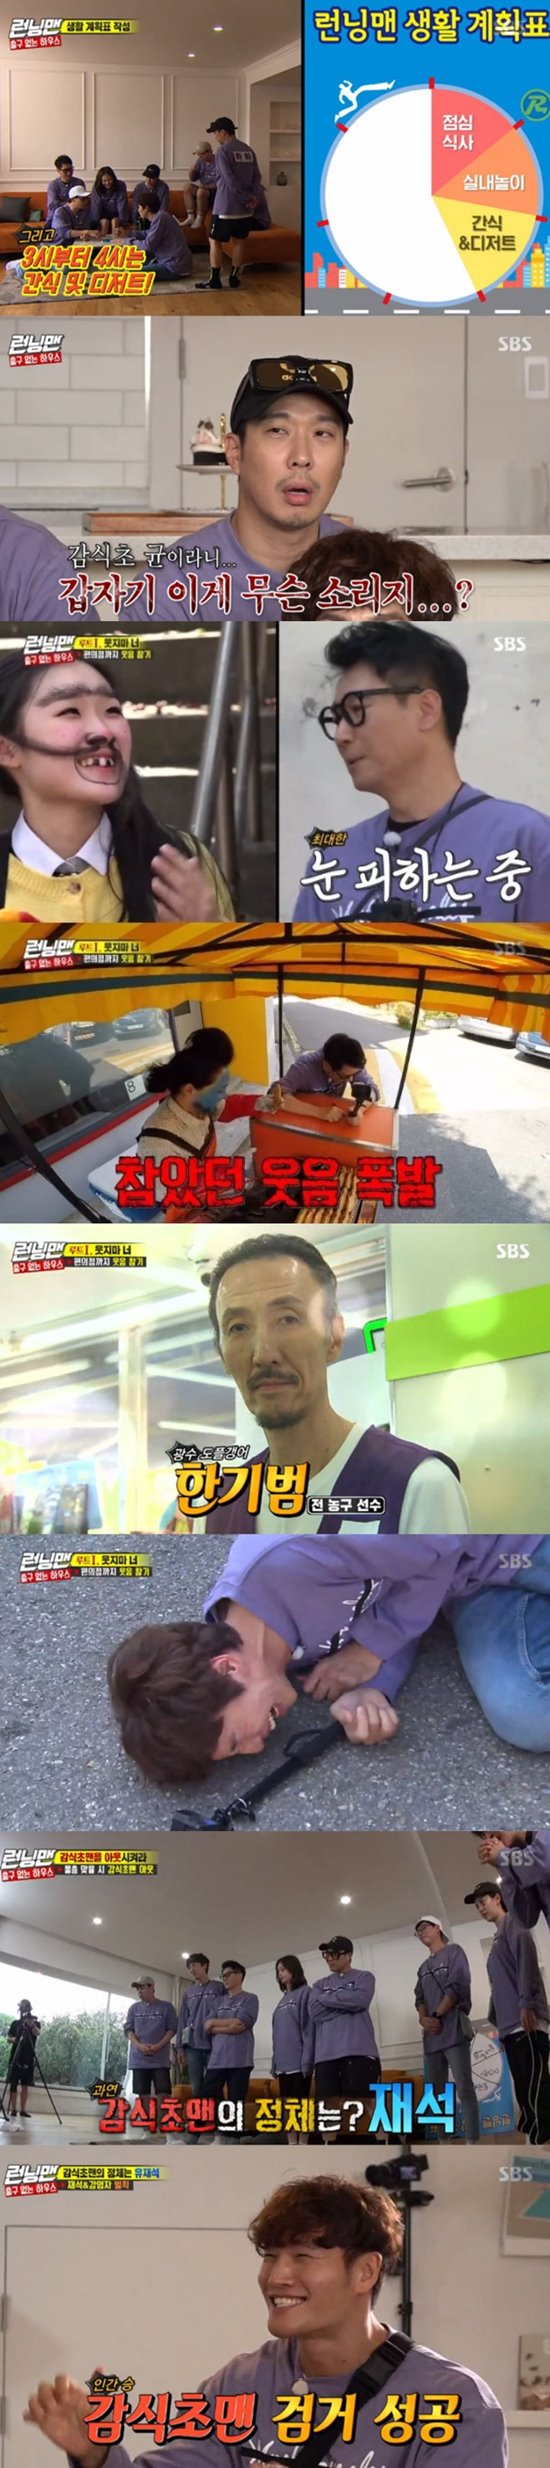 SBS Running Man kept the top spot in the same time zone of 2049 TV viewer ratings.According to Nielsen Korea, a TV viewer rating research institute, Running Man, which was broadcast on the 20th, recorded 4% of the 2049 target TV viewer ratings, which is an important indicator of major advertising officials, higher than last week (based on the second part of the Seoul metropolitan area furniture TV ratings), beating all the Masked Wang and Donkey Ears.Top TV viewer ratings per minute soared to 7.4 percent.On this day, the broadcast was featured in the House without exit feature, and the previous level of laughter was revealed.The crew asked the members to take a picture from 12:00 to 6:00 pm at home, and the members were immersed in the life plan without knowing the English language.The cause of this is the rapid spread of persimmon vinegar bacteria, he warned on TV in the house, and when infected, the feelings and appetites disappear and all things become initialized.One of the members struggle to find the persimmon vinegar man along with the execution of the life plan table was an unexpected hard laugh.Ji Suk-jin went out of the house with a cheerful easy, but he collapsed in the appearance of Yondu, infecting the persimmon vinegar, and even spreading the name tag of Jeon So-min.Lee Kwang-soo and Kim Jong-kook also stepped out on Top Model.Kim Jong-kook succeeded in laughing and winning human hints, and Lee Kwang-soo was in front of the success of the mission, but it collapsed in the appearance of basketball player Han Ki-bum.Yang Se-chan also failed to get the commission.Yoo Jae-Suk, along with Haha, made a top model on the paparazzi mission If you get shot, you die.The moment the two succeeded in mission, Ji Suk-jin spread the persimmon vinegar to Lee Kwang-soo and was infected to Song Ji-hyo.Kim Jong-kook was successful in arresting Yoo Jae-Suk as a persimmon vinegar man.The scene was the best TV viewer rating per minute with 7.4%.All penalties were confirmed, except for Kim Jong-kook and Haha, and two members who were identified by the two members.Photo = SBS Broadcasting Screen